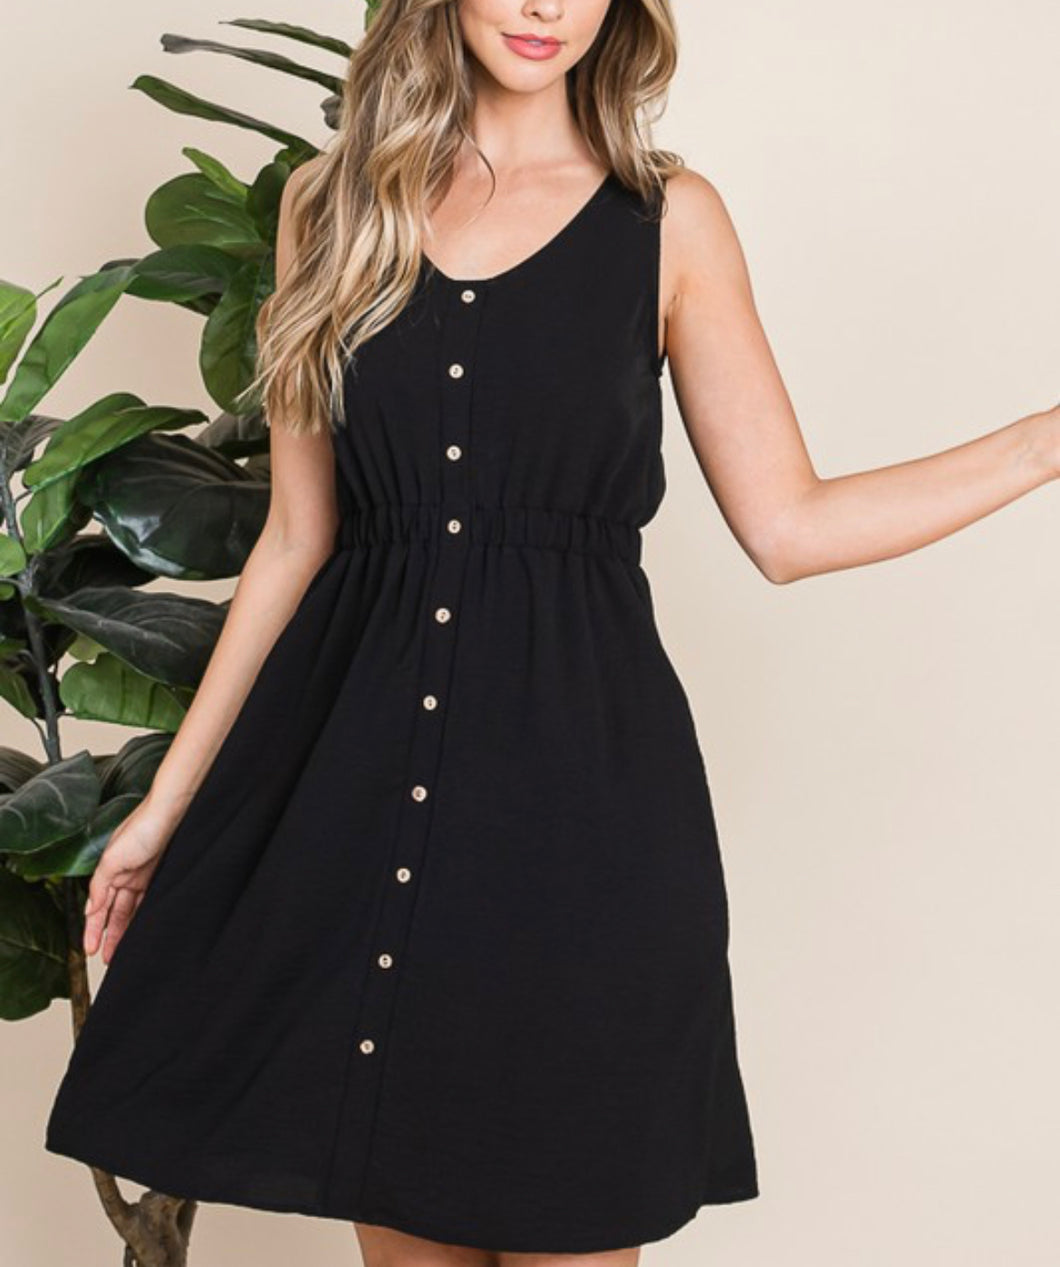 Black Sleeveless Midi Dress with Button Down Front